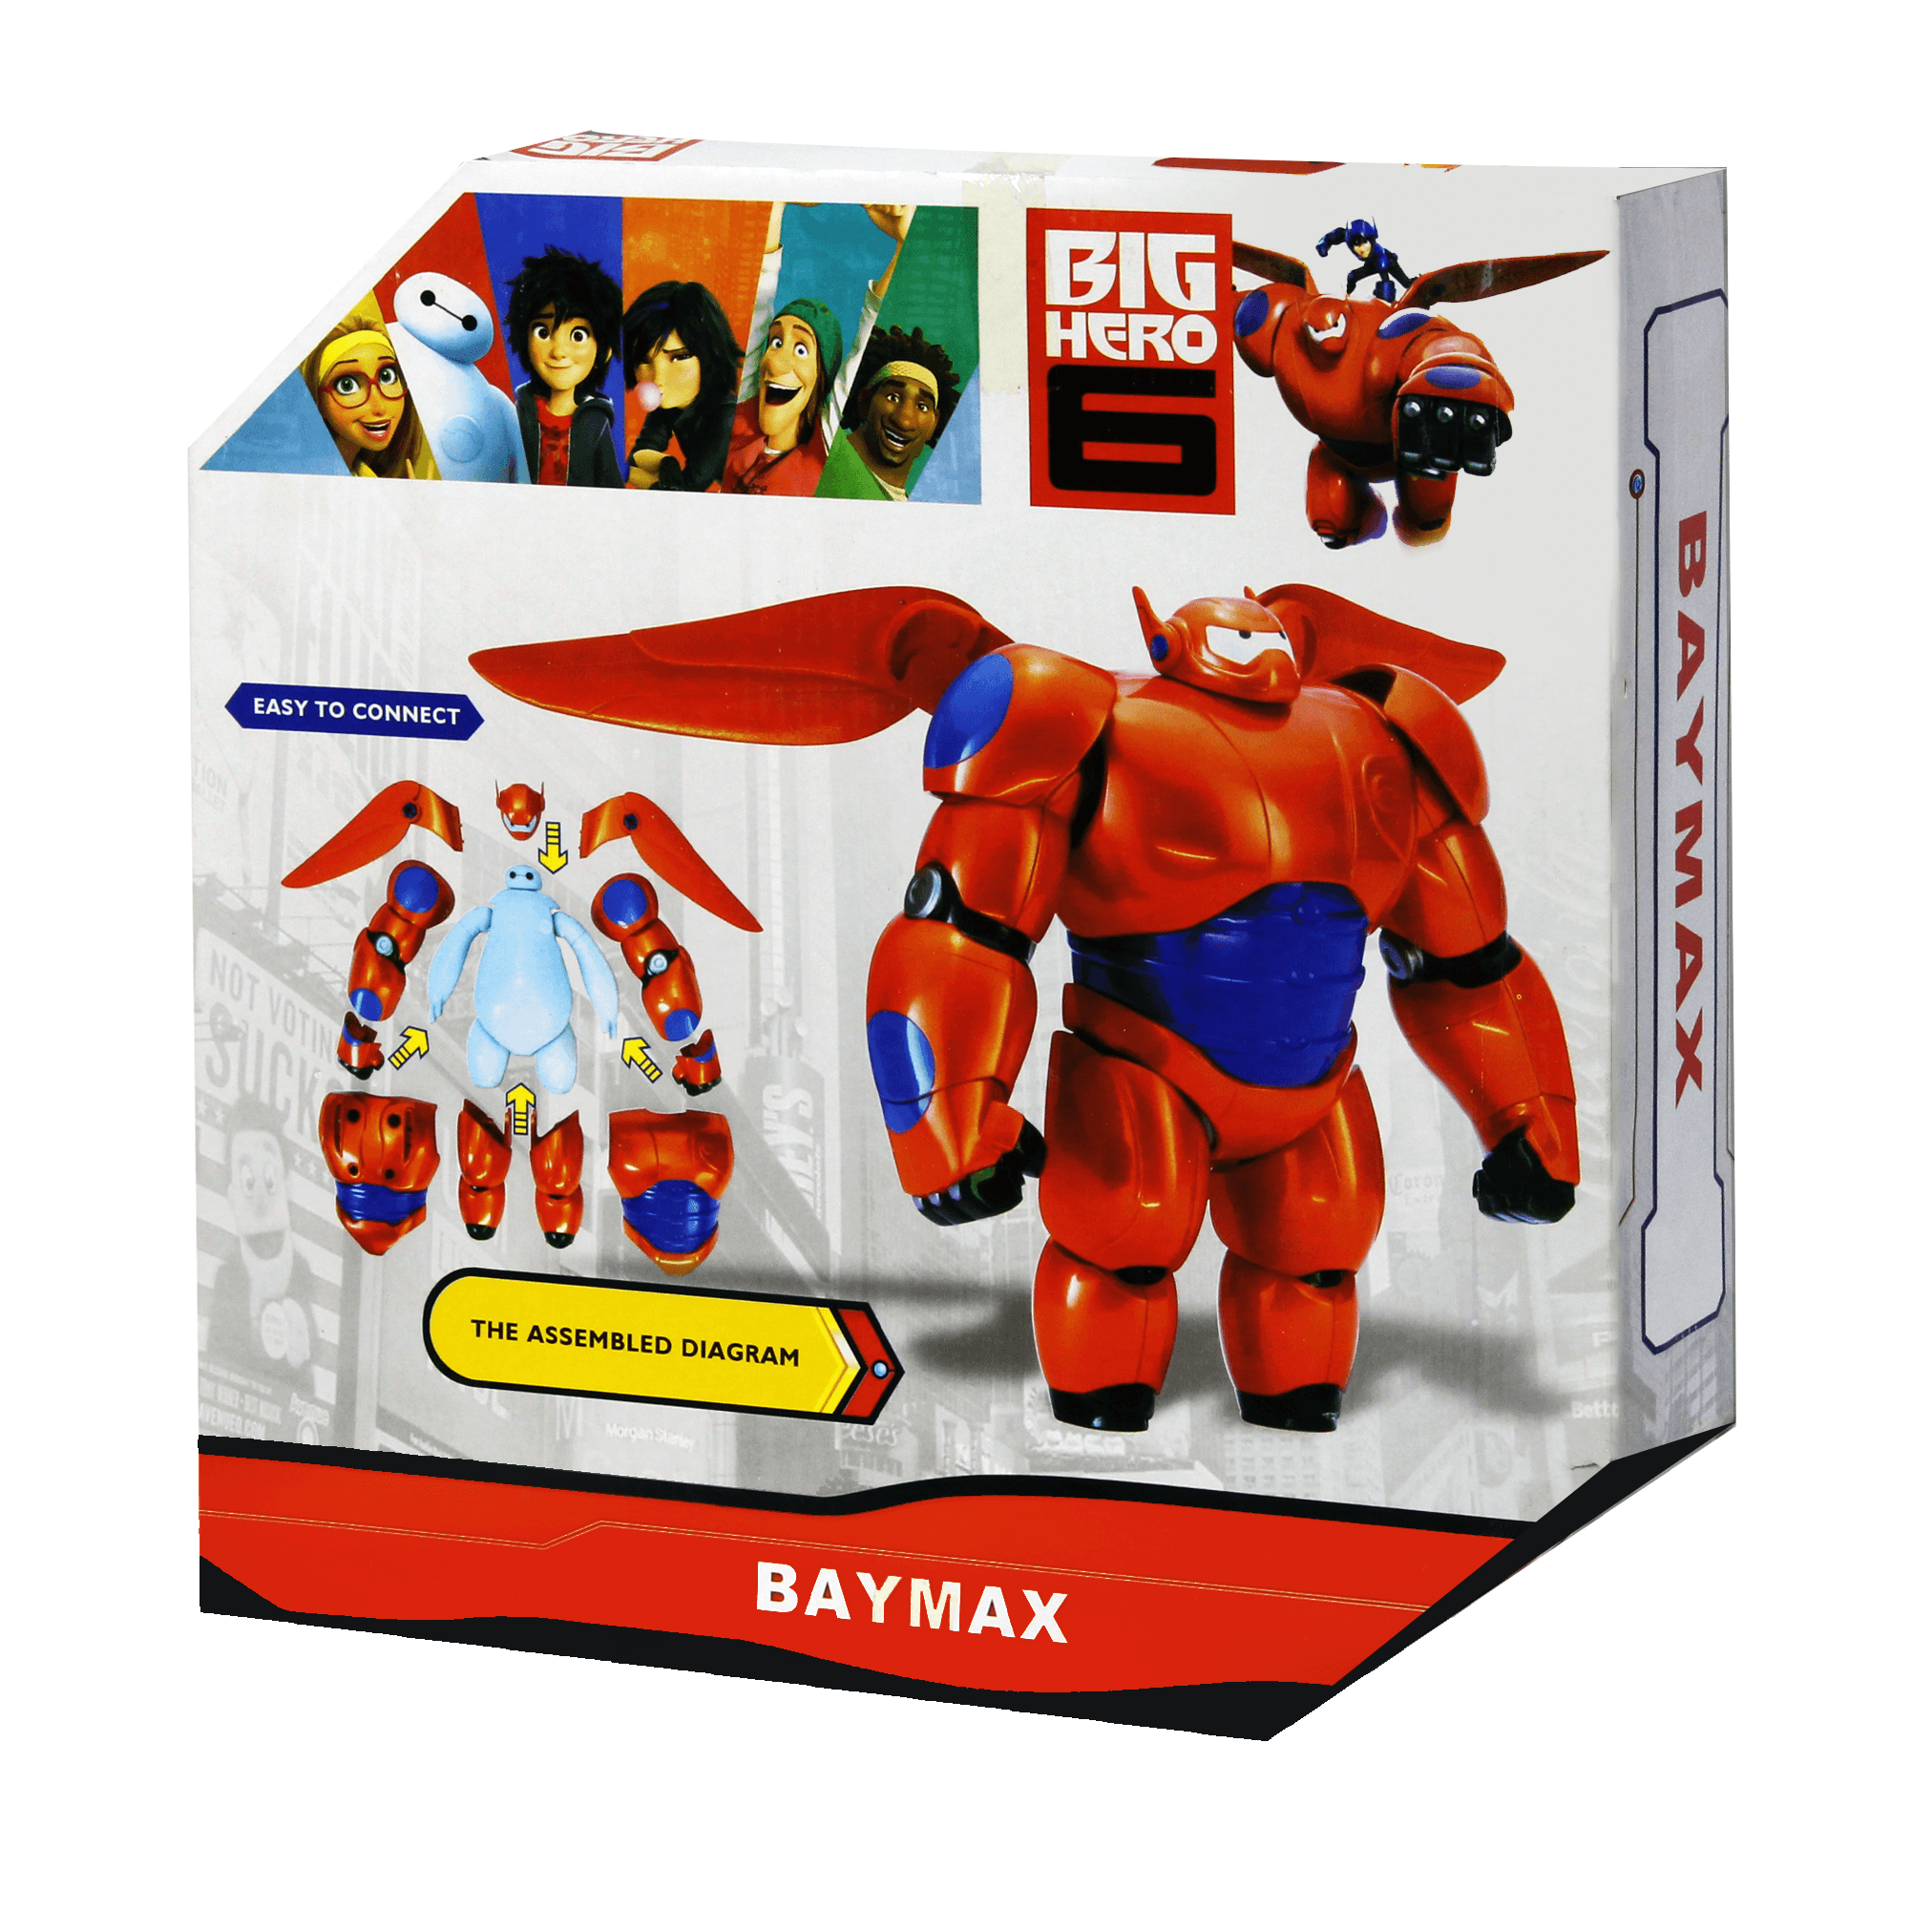 BIG HERO 6 Assemblage Game 20 Pieces for Kids - BumbleToys - 3+ years, BayMax, Big Hero, Boys, Puzzles & Jigsaws, Toy Land